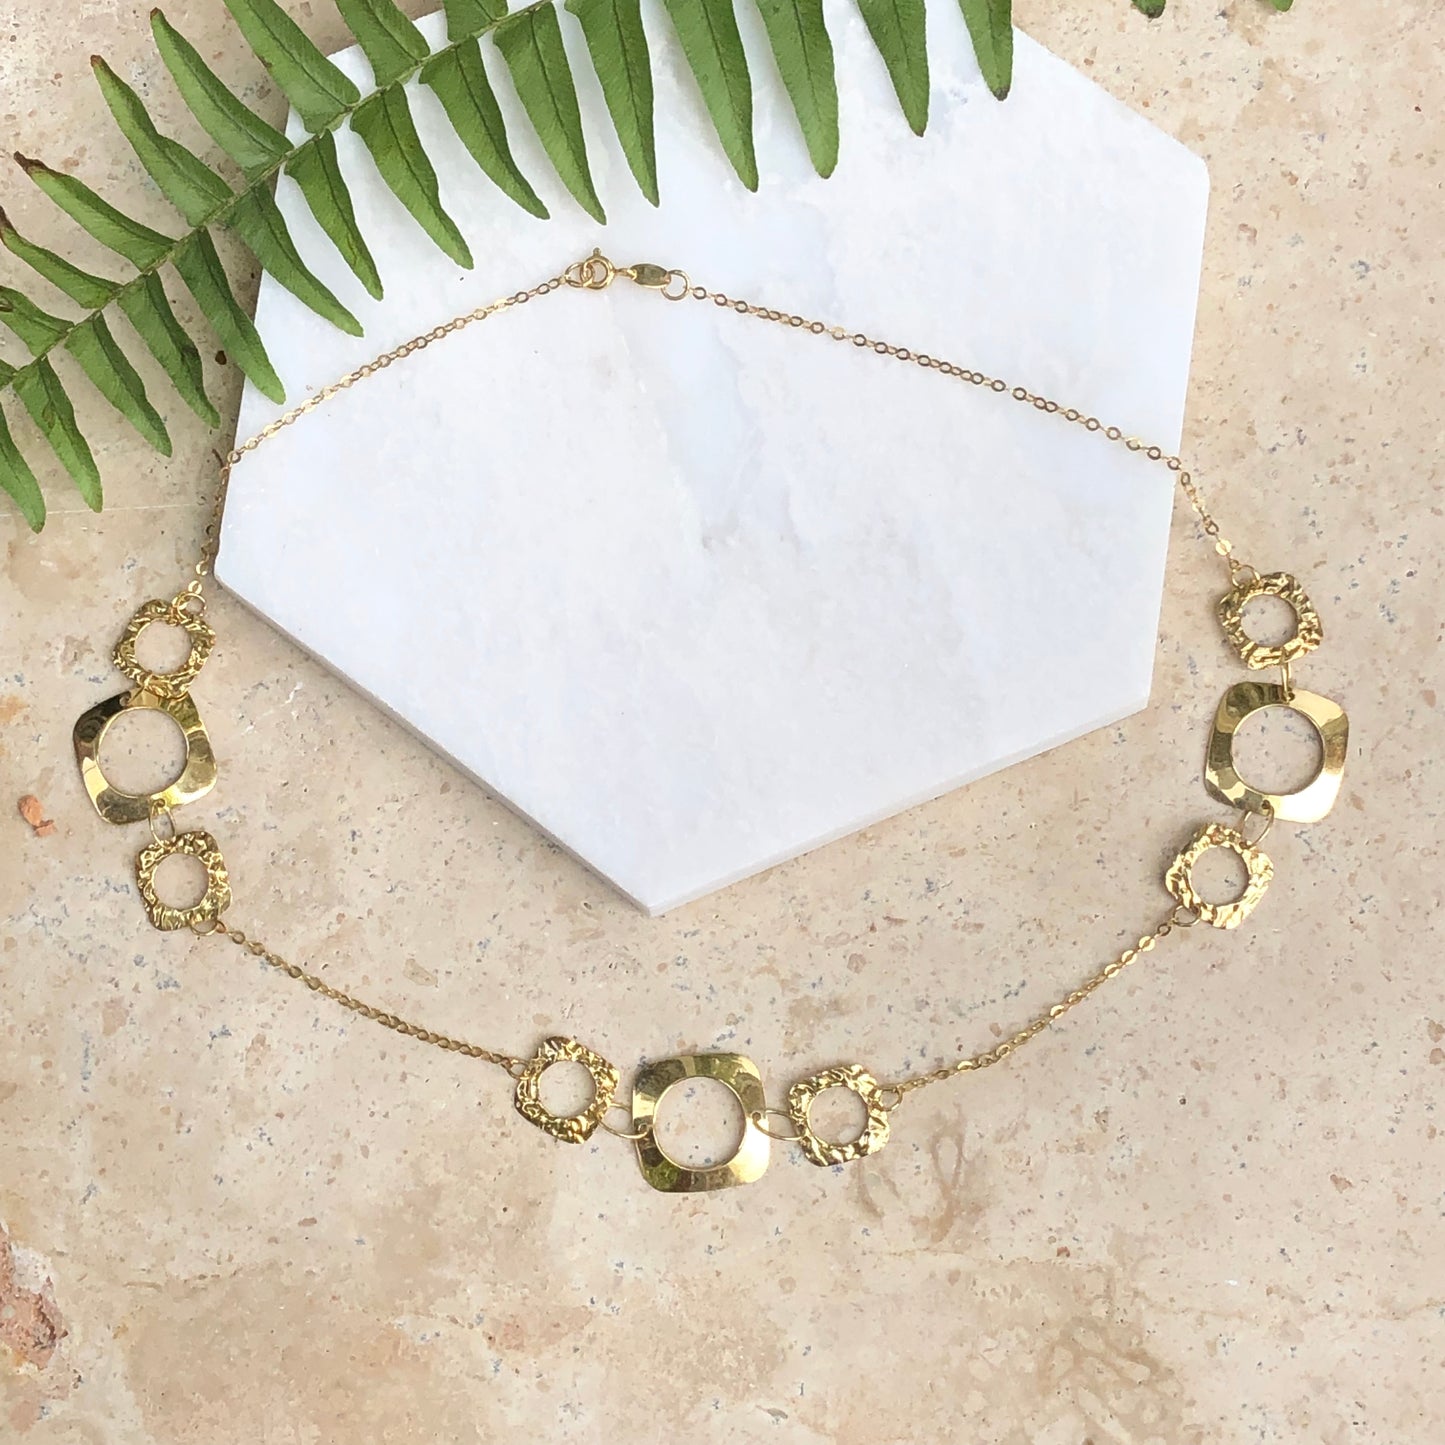 14KT Yellow Gold Shiny + Hammered Squared Circle Link Necklace, 14KT Yellow Gold Shiny + Hammered Squared Circle Link Necklace - Legacy Saint Jewelry